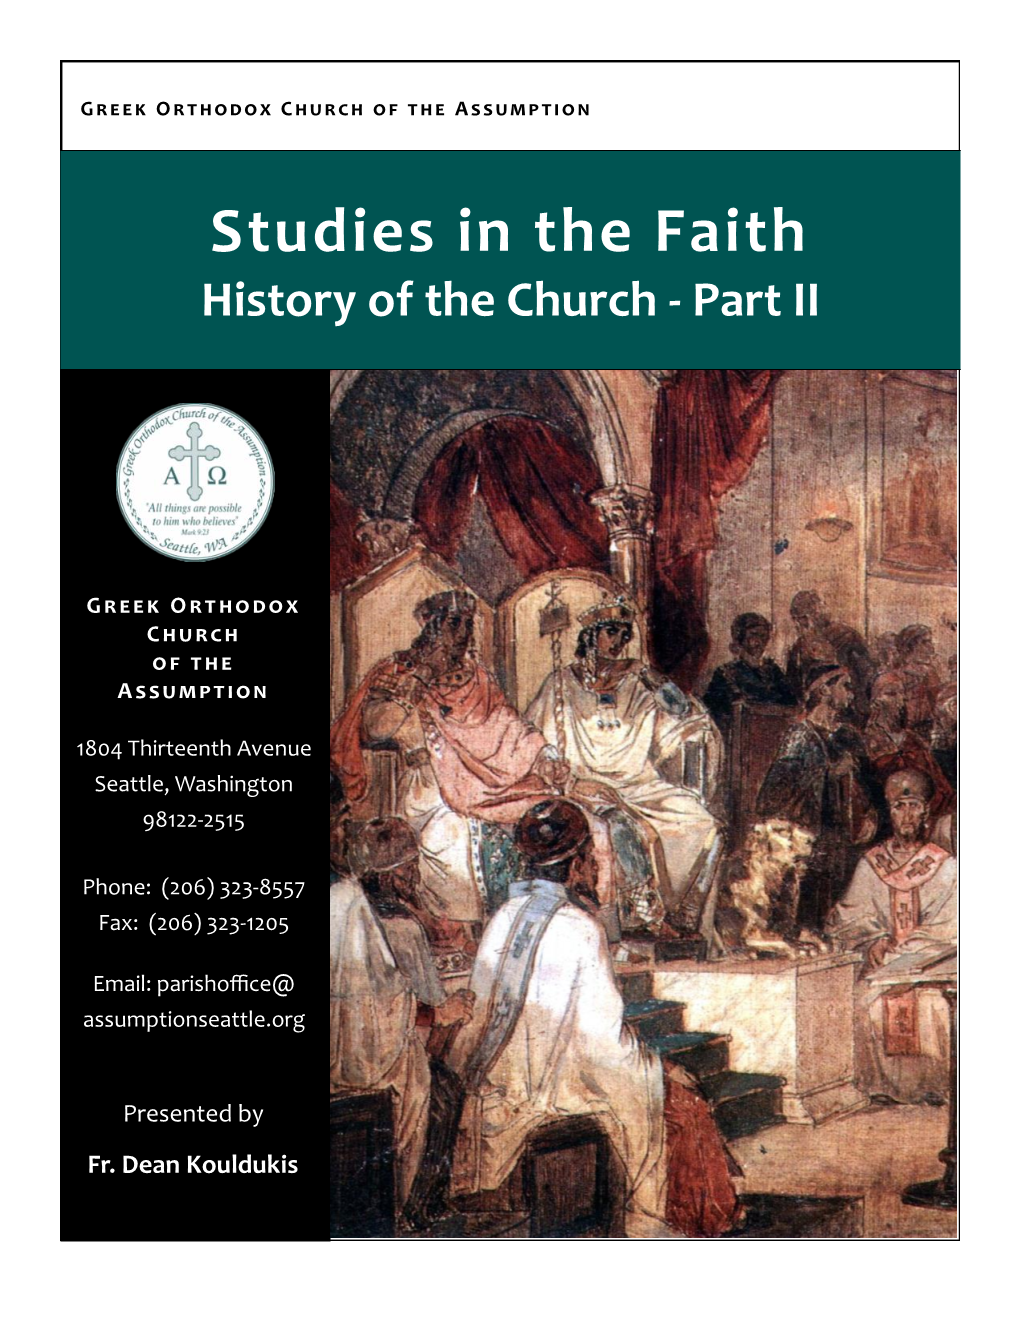 Studies in the Faith History of the Church - Part II